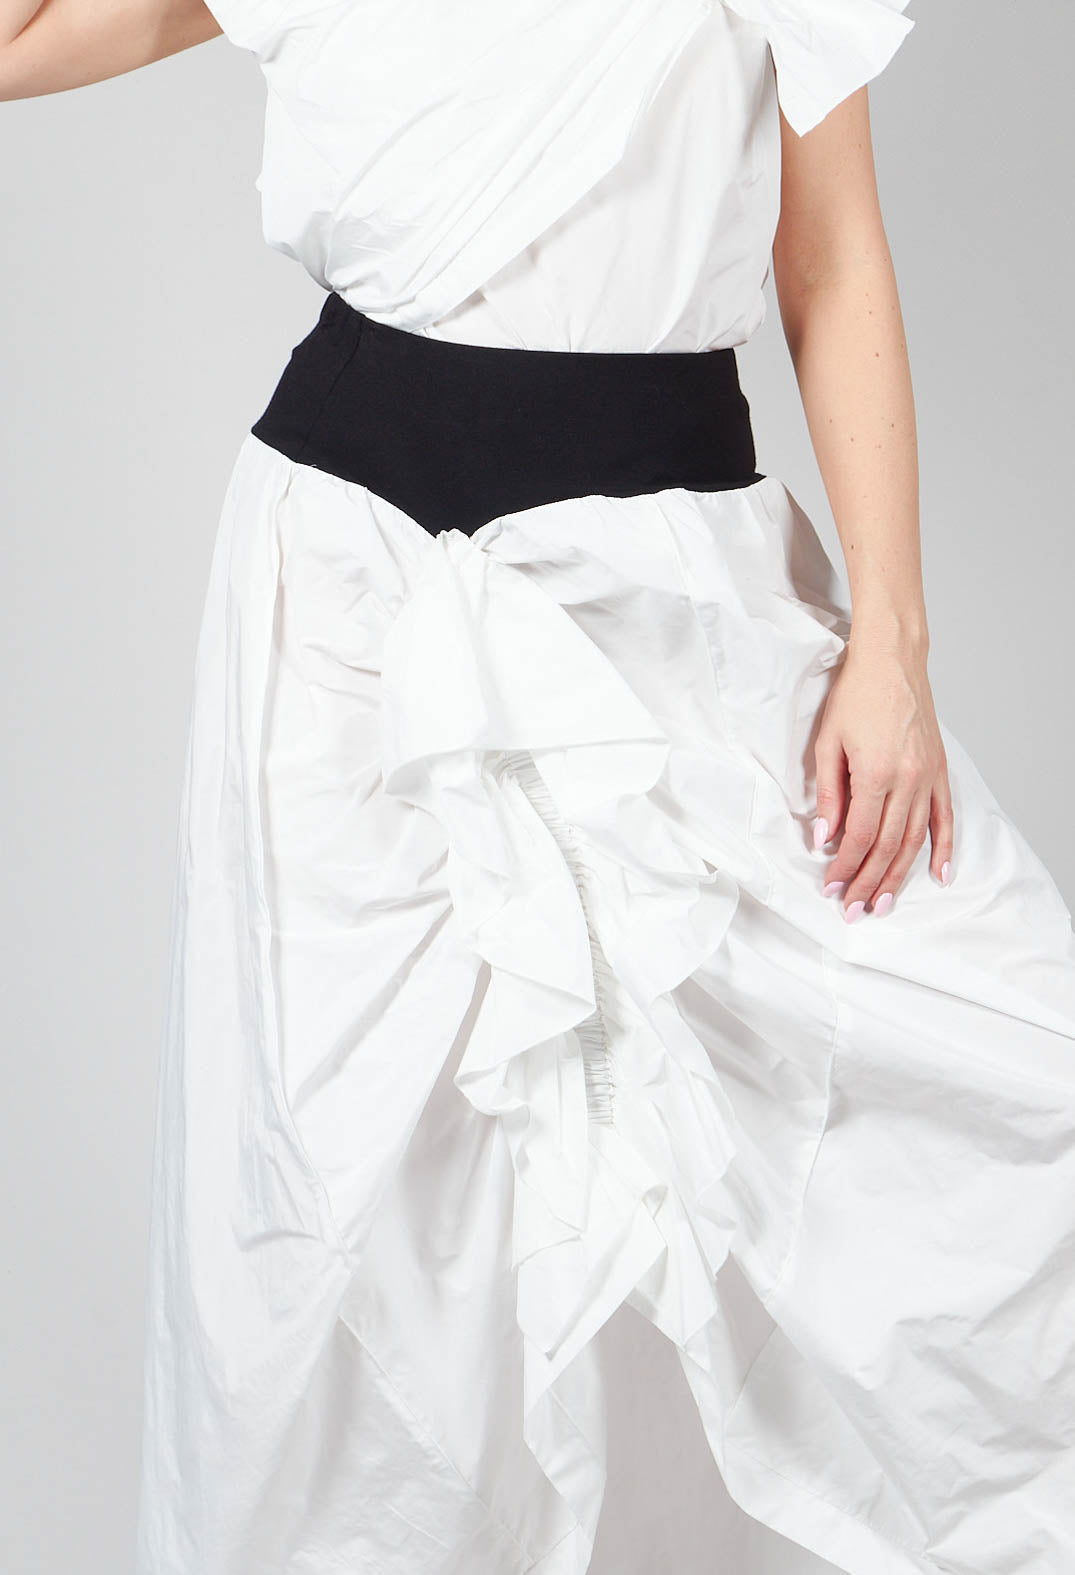 ORDI Skirt in Black with White